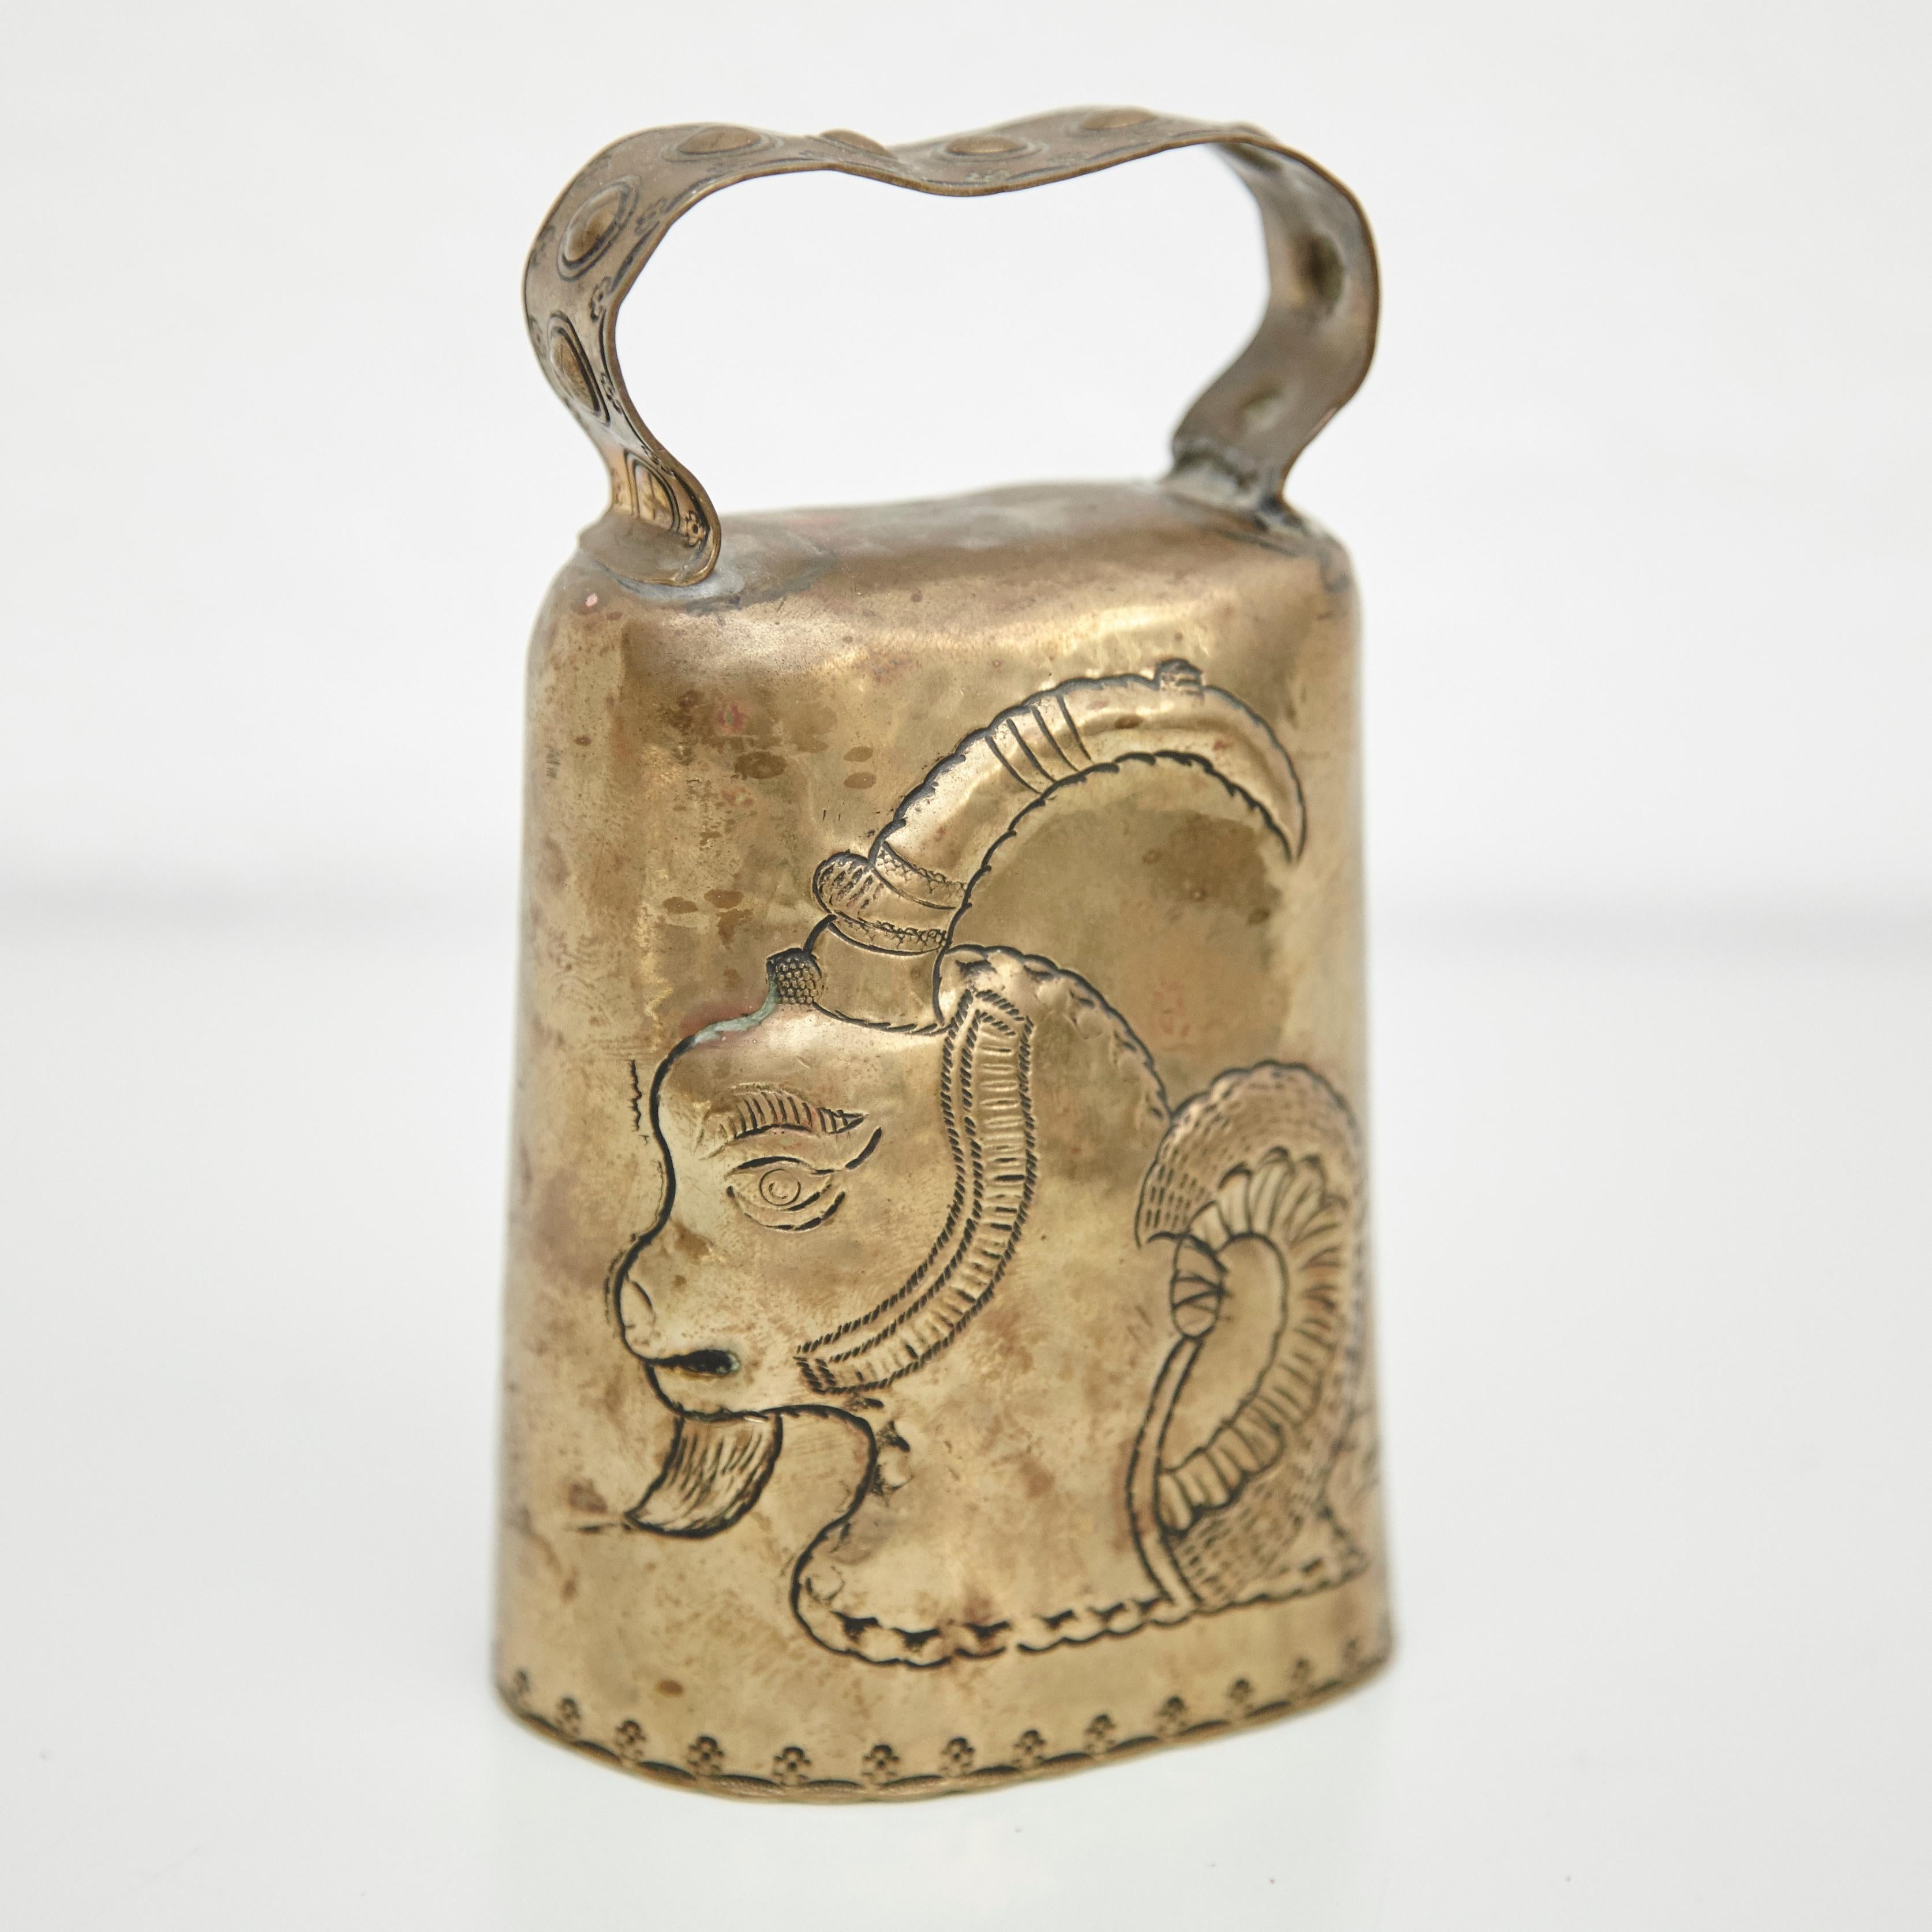 Early 19th century traditional rustic bronze goatbell. 
Special hand engraved drawings of a goat and flowers.
By unknown manufacturer, Spain.

In original condition, with minor wear consistent with age and use, preserving a beautiful